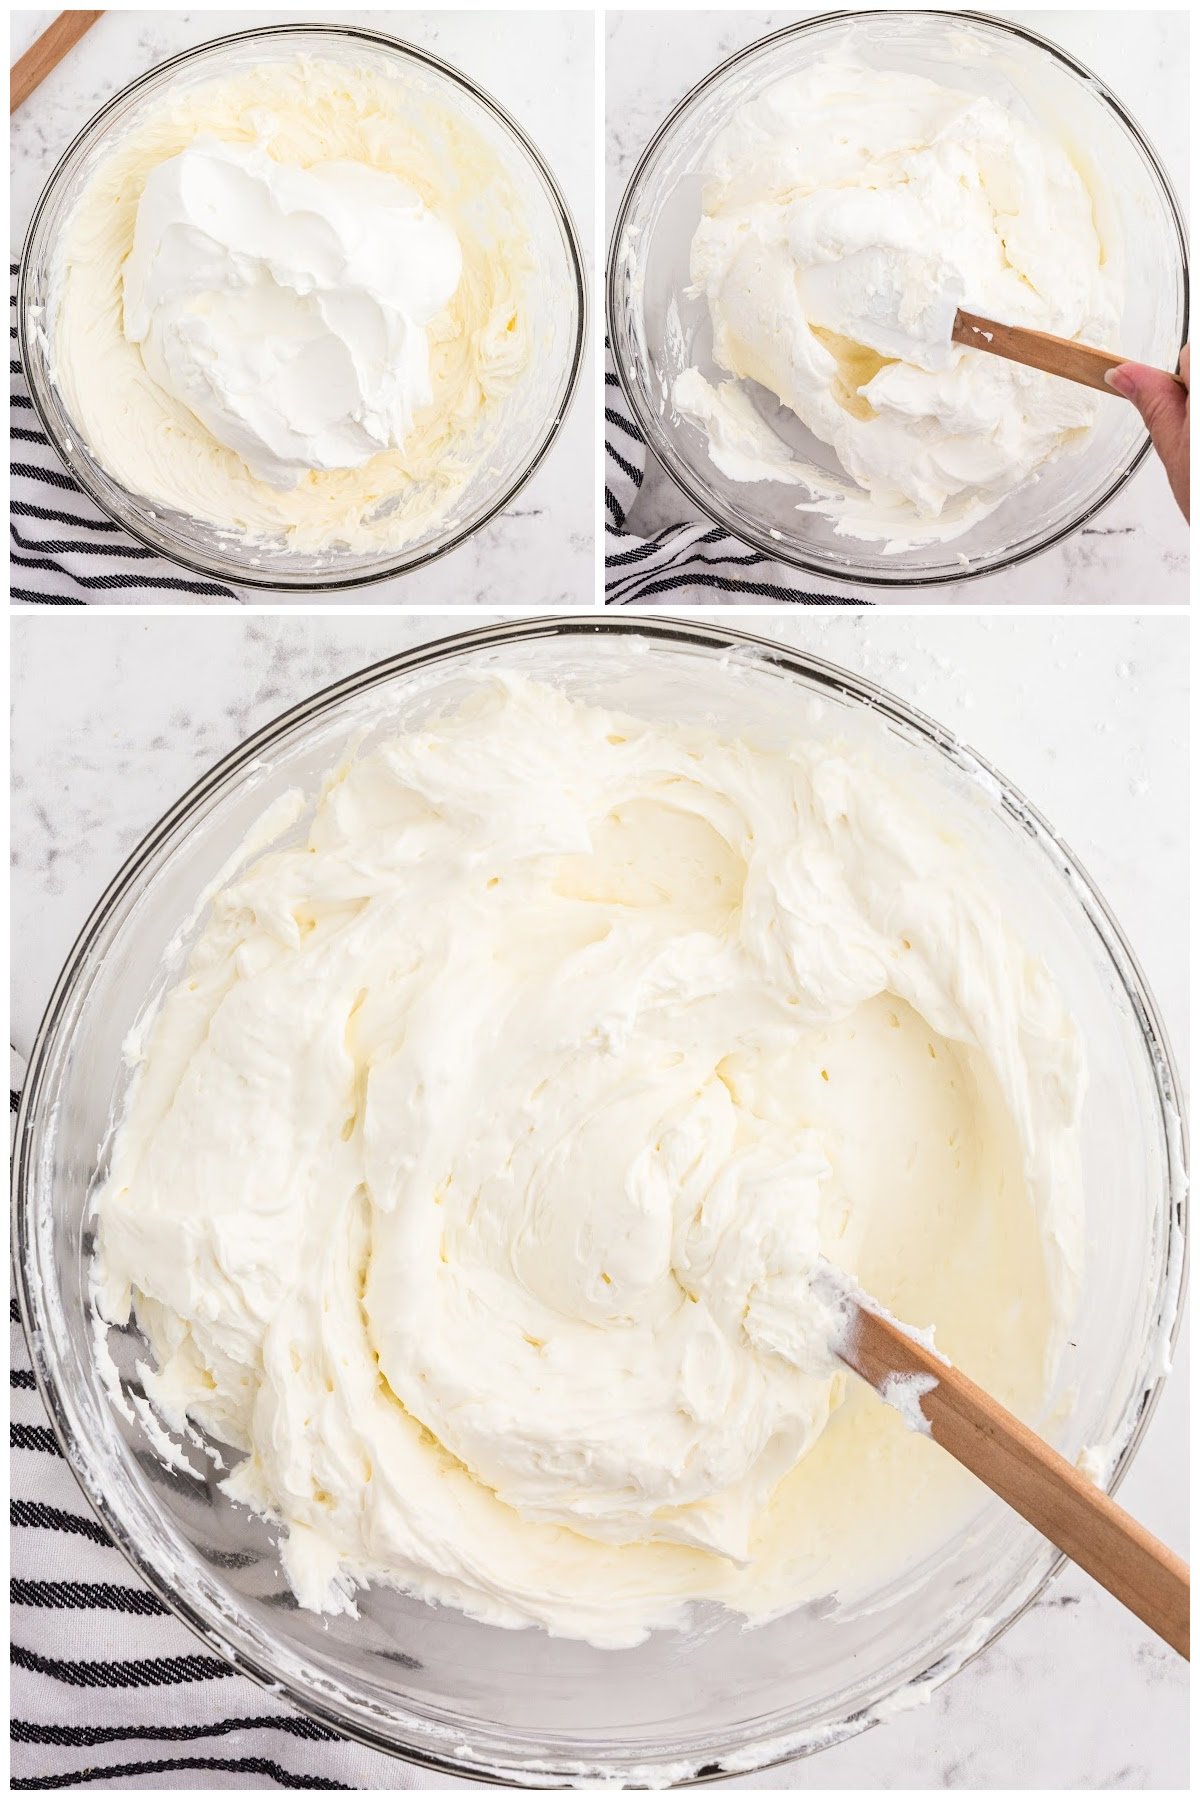 Folding the whipped cream into the cream cheese mixture.